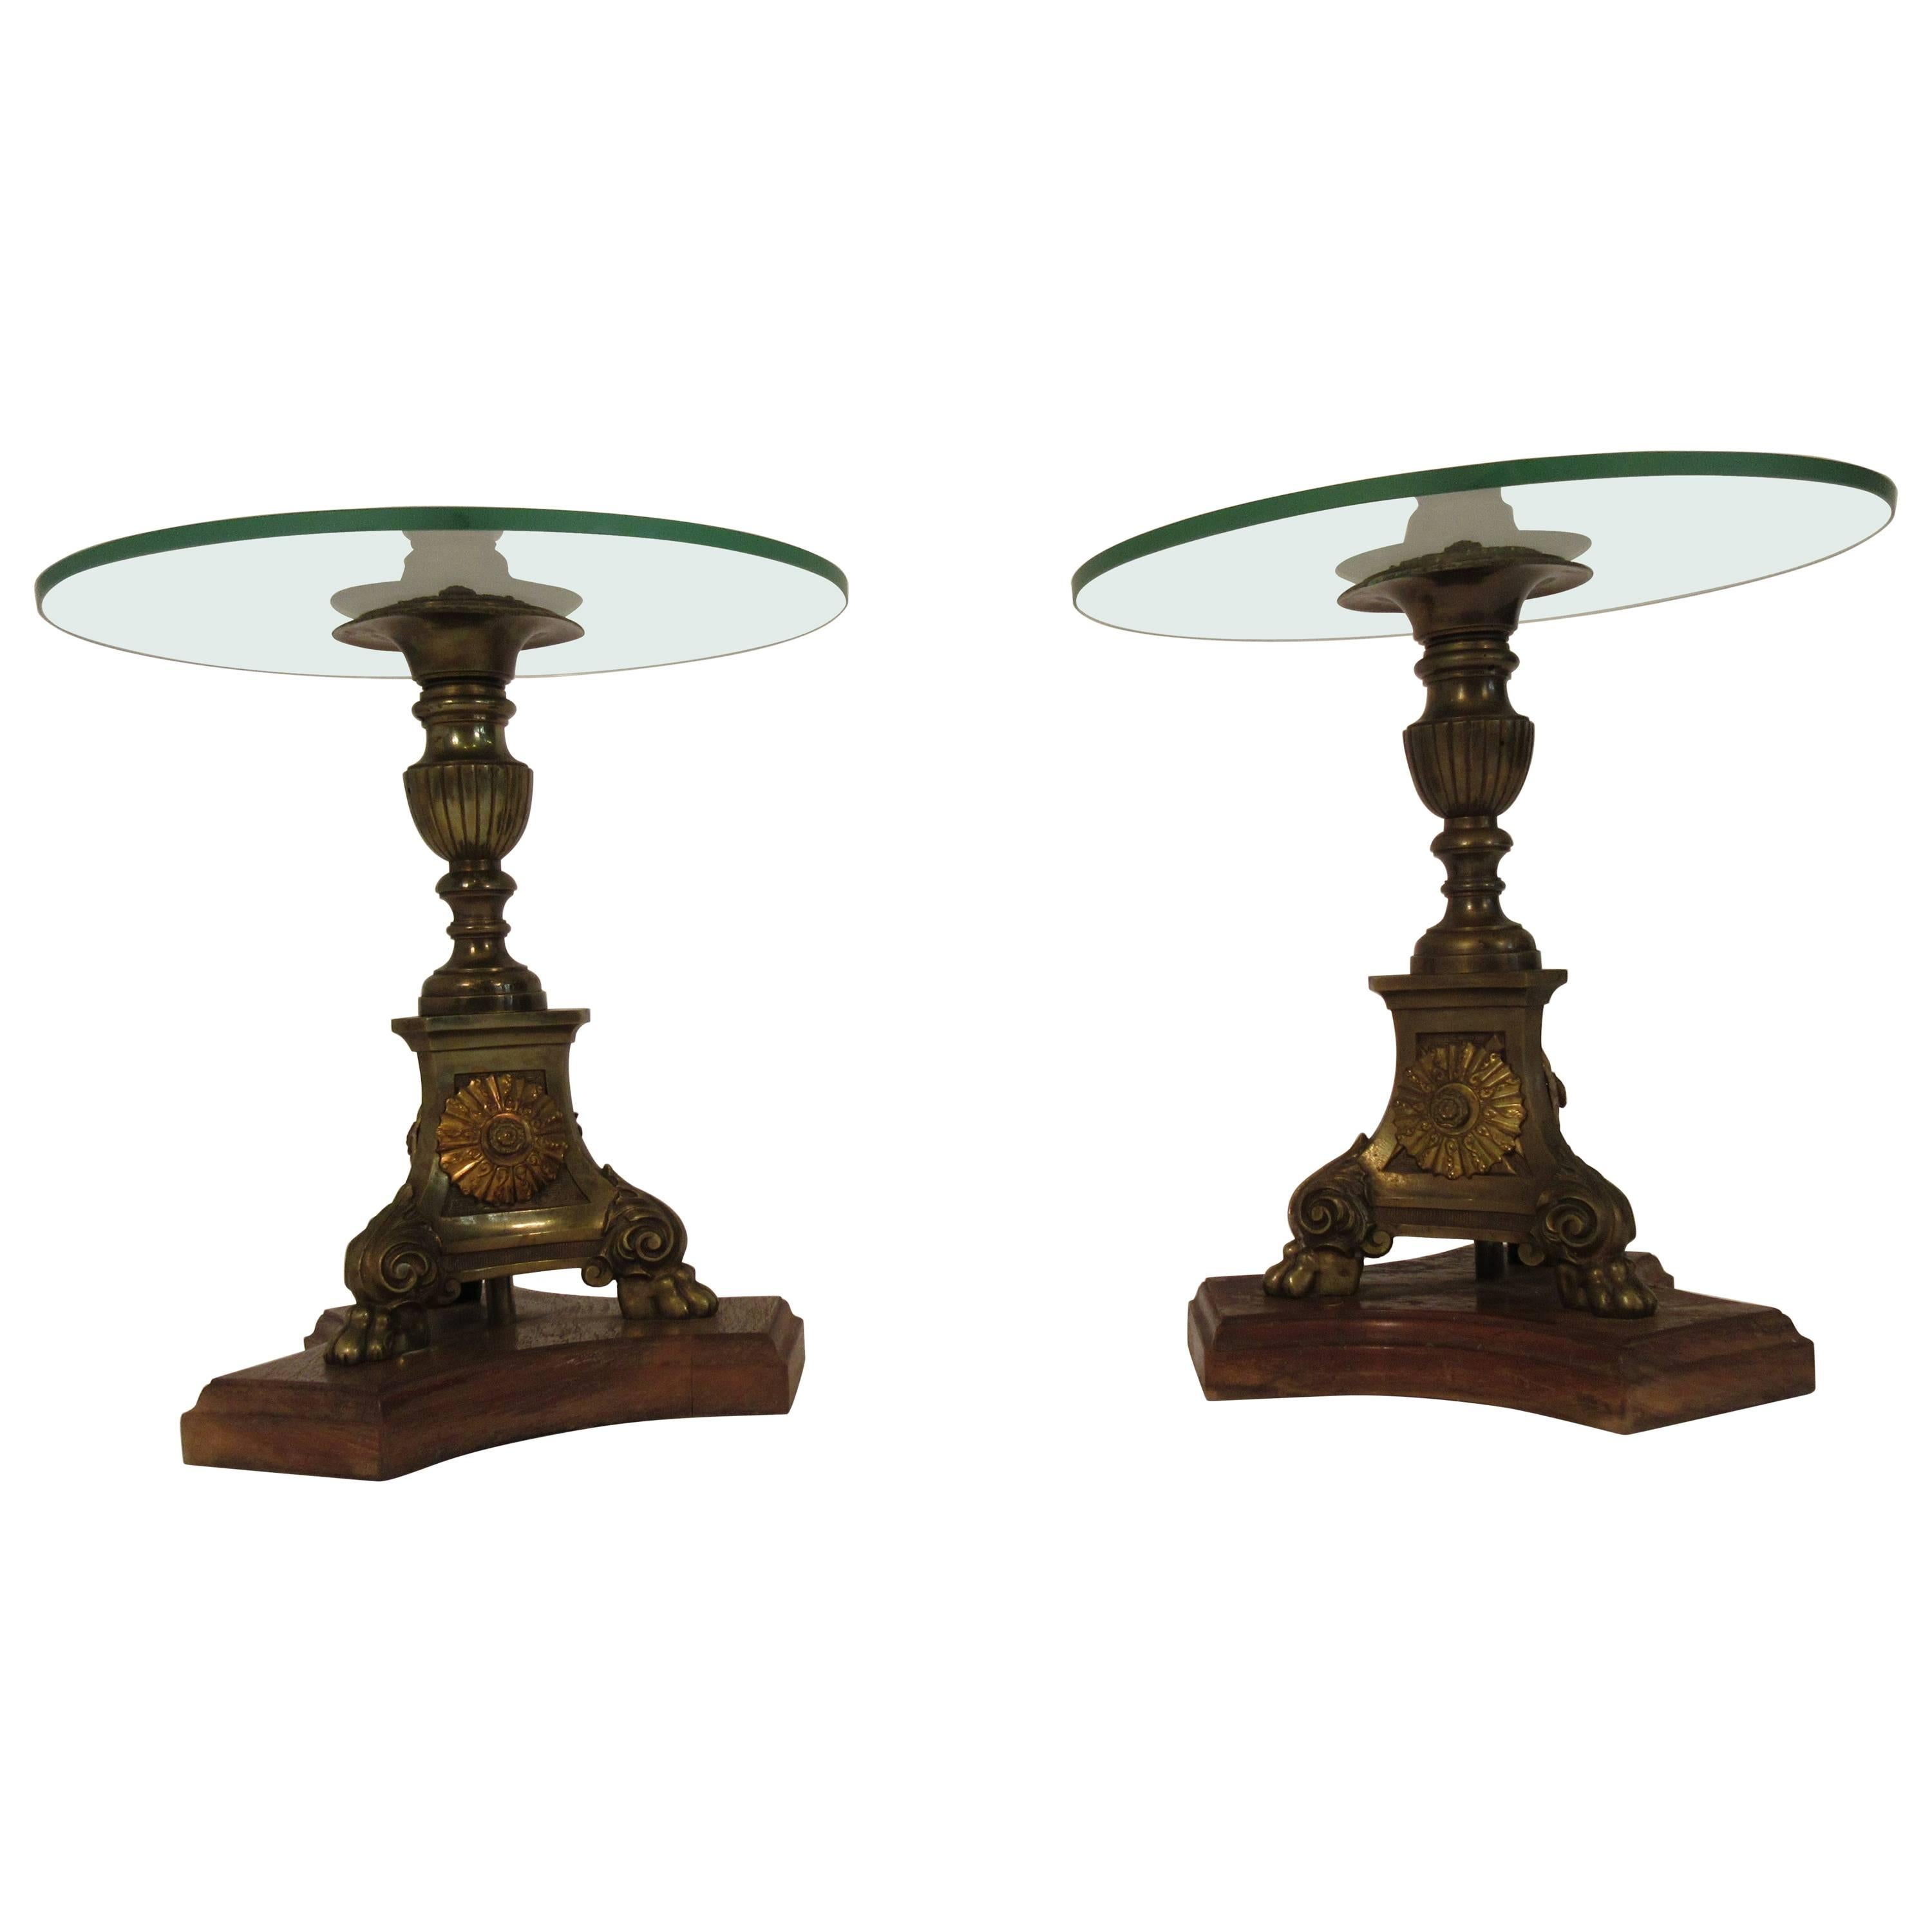 Pair of 19th Century Brass Church Candlestick Side Tables with Glass Tops